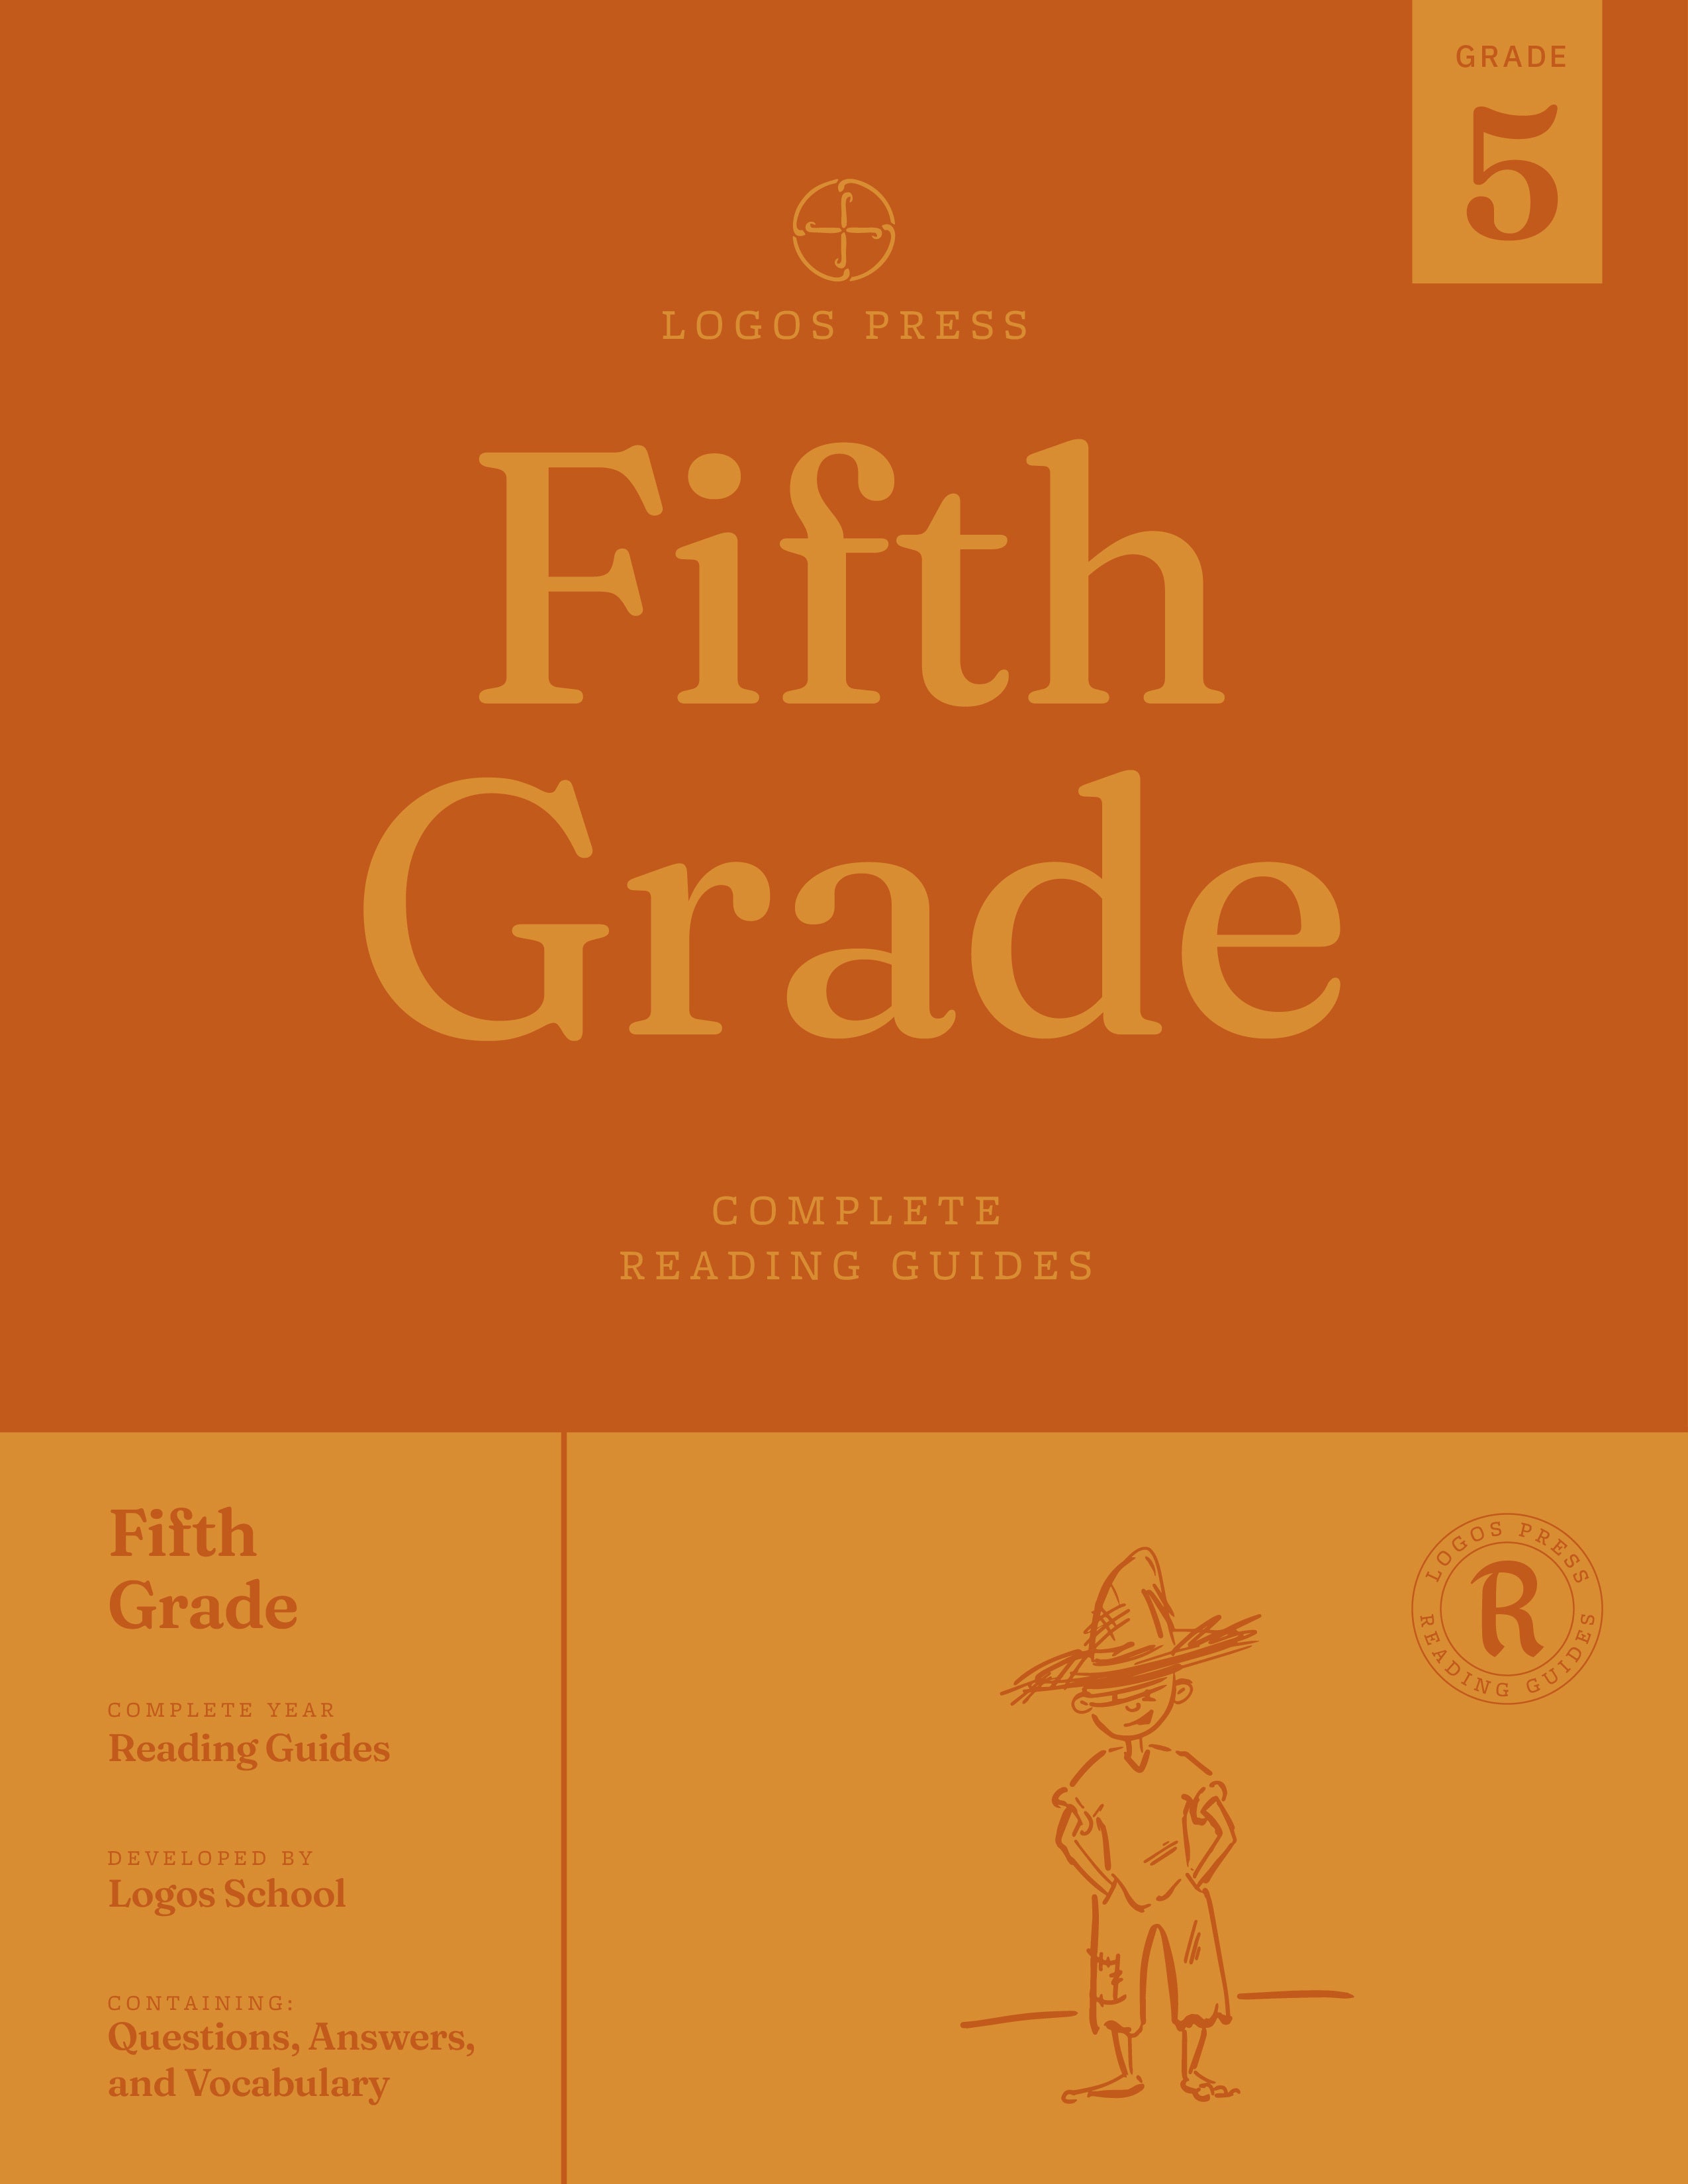 5th Grade Reading Guide Package (Download)